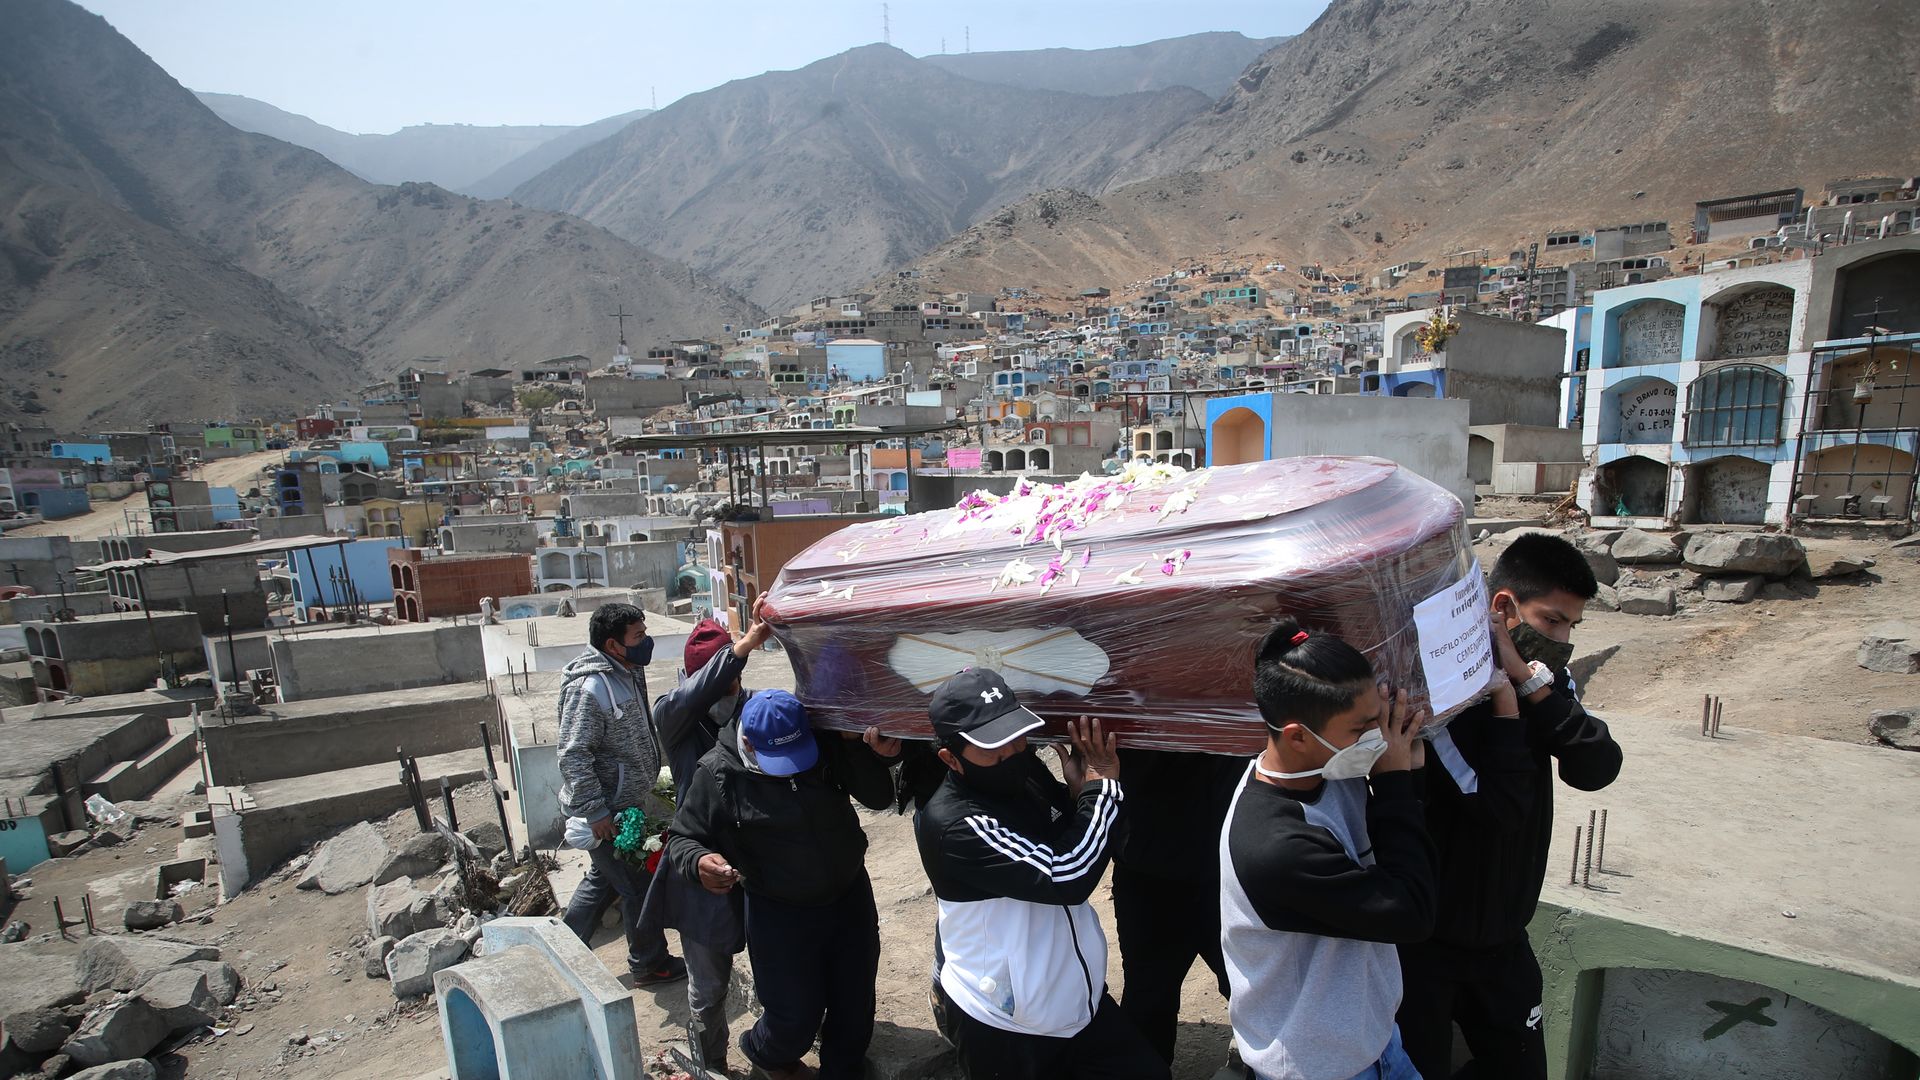 Relatives of Teofilo Yovera Yarleque, 72, who they say died of COVID-19, carry his coffin for burial at the cemetery "Martires 19 de Julio" on August 20, 2020 in Comas, in the outskirts of Lima, Peru